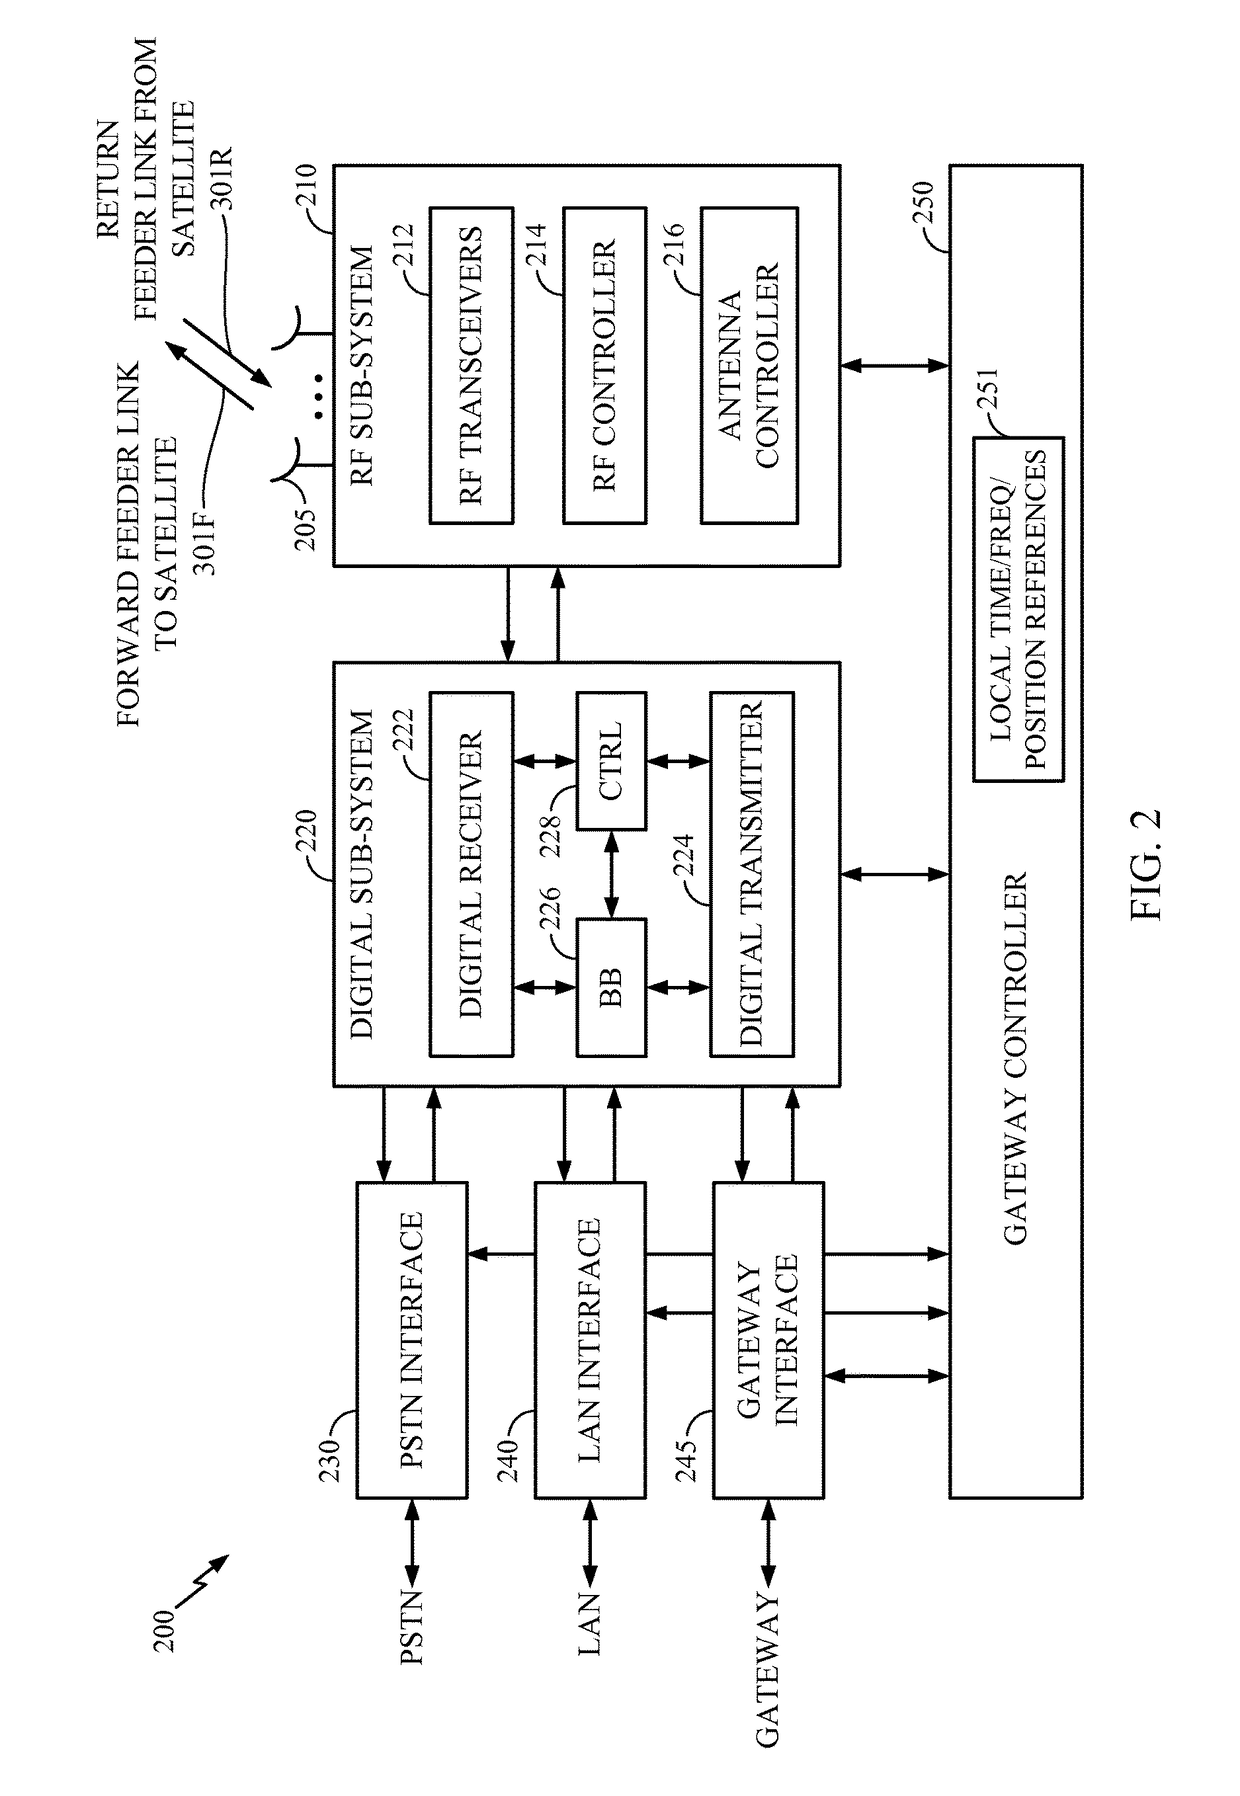 Method and apparatus for time or frequency synchronization in non-geosynchronous satellite communication systems